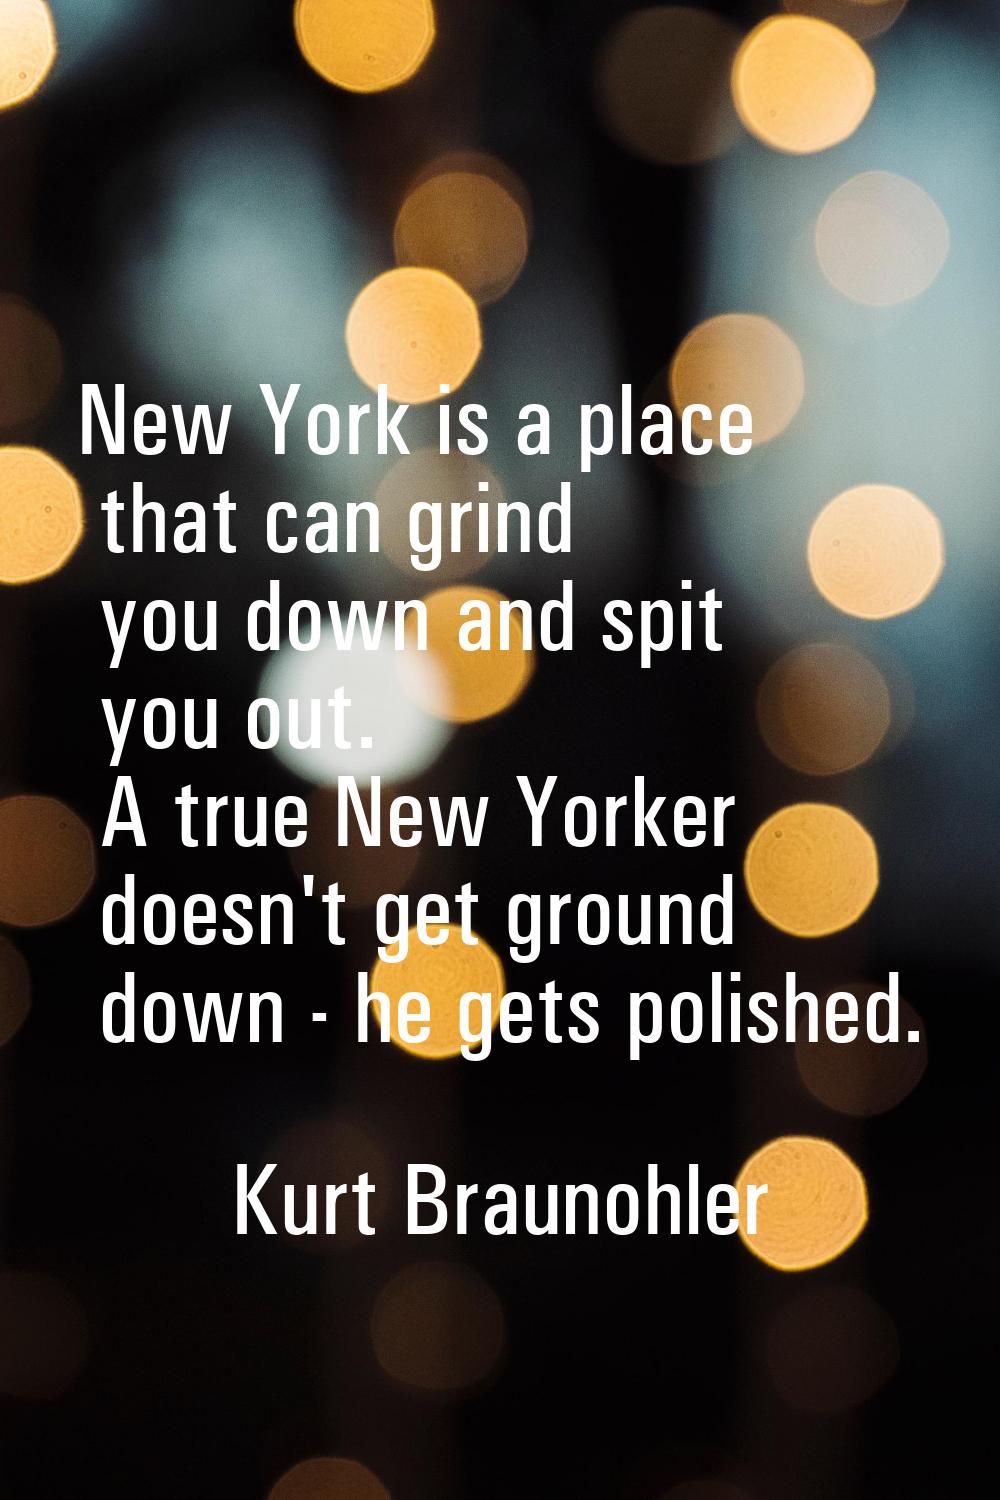 New York is a place that can grind you down and spit you out. A true New Yorker doesn't get ground 